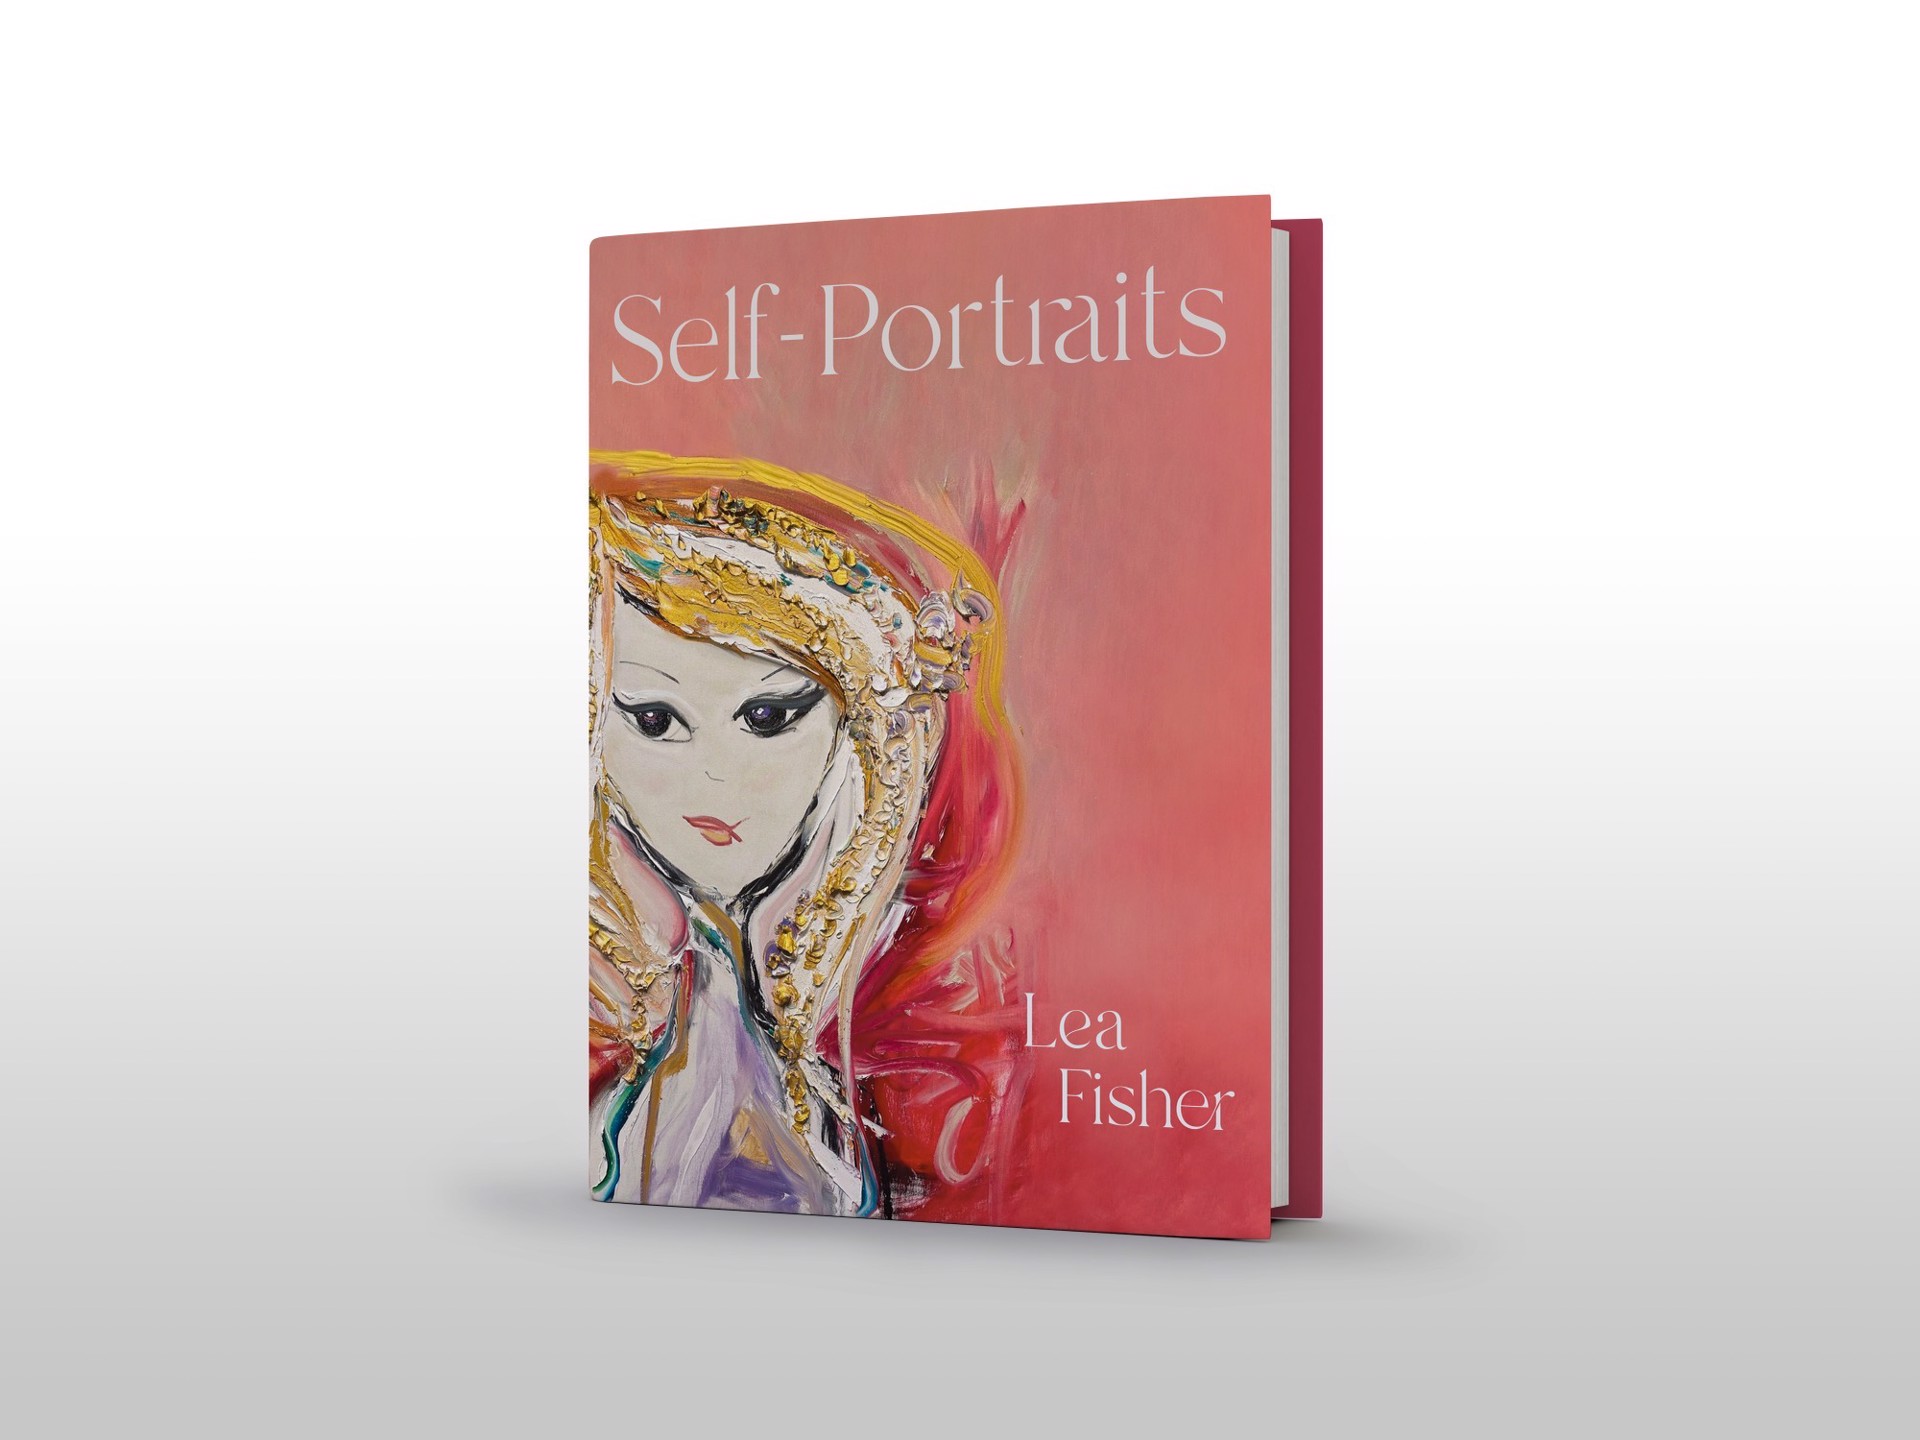 Reflections of an Artist's Journey by Lea Fisher